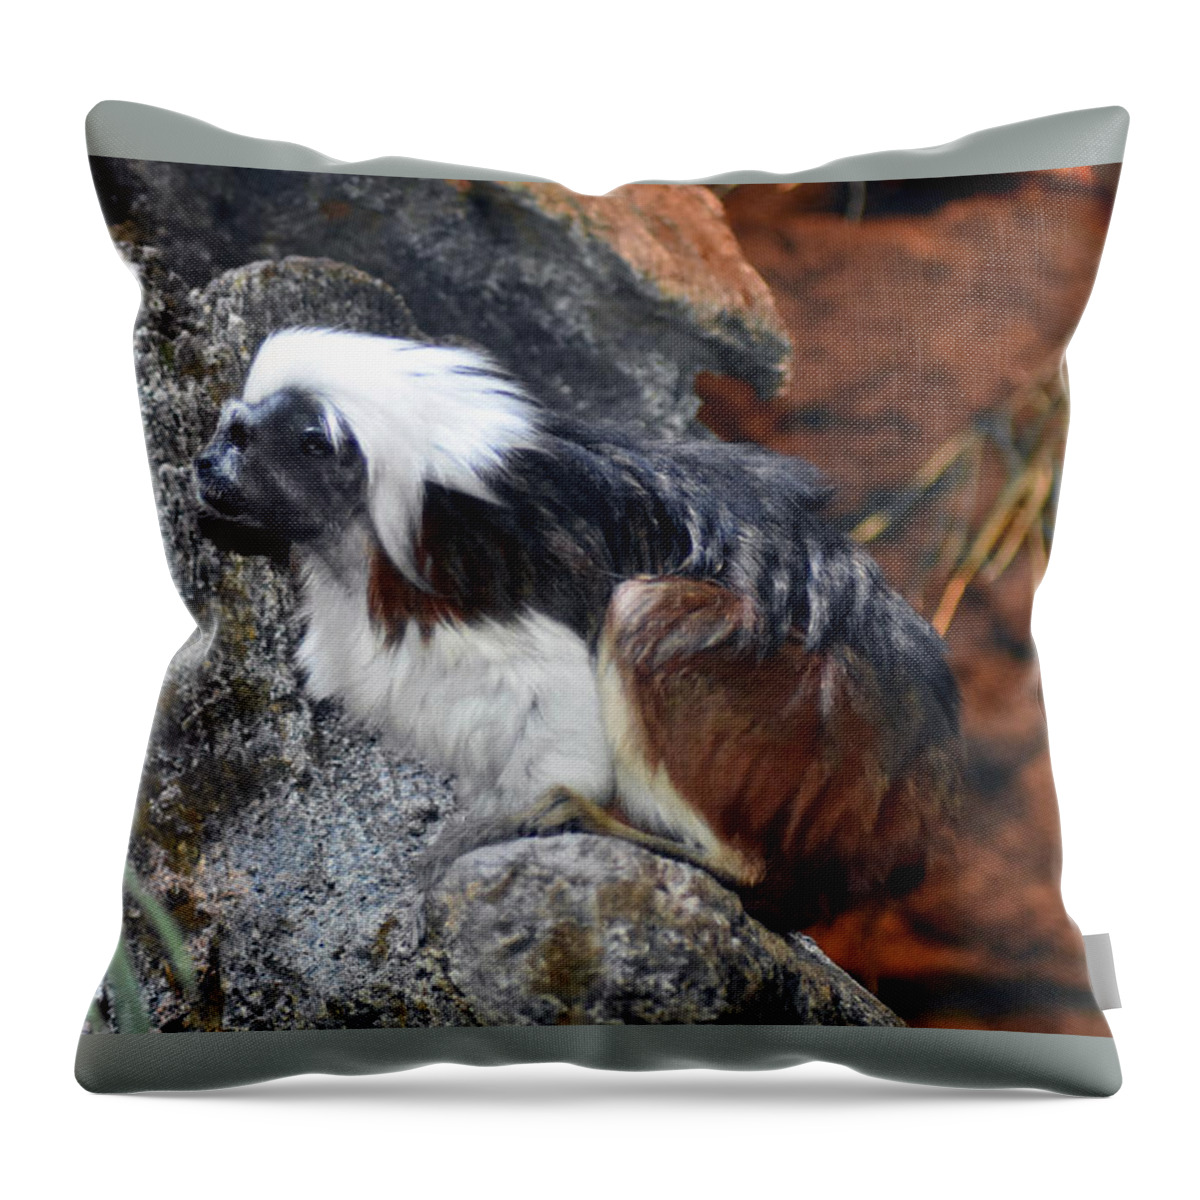 Monkeys Throw Pillow featuring the photograph Cotton Top Tamarin Monkey by DB Hayes